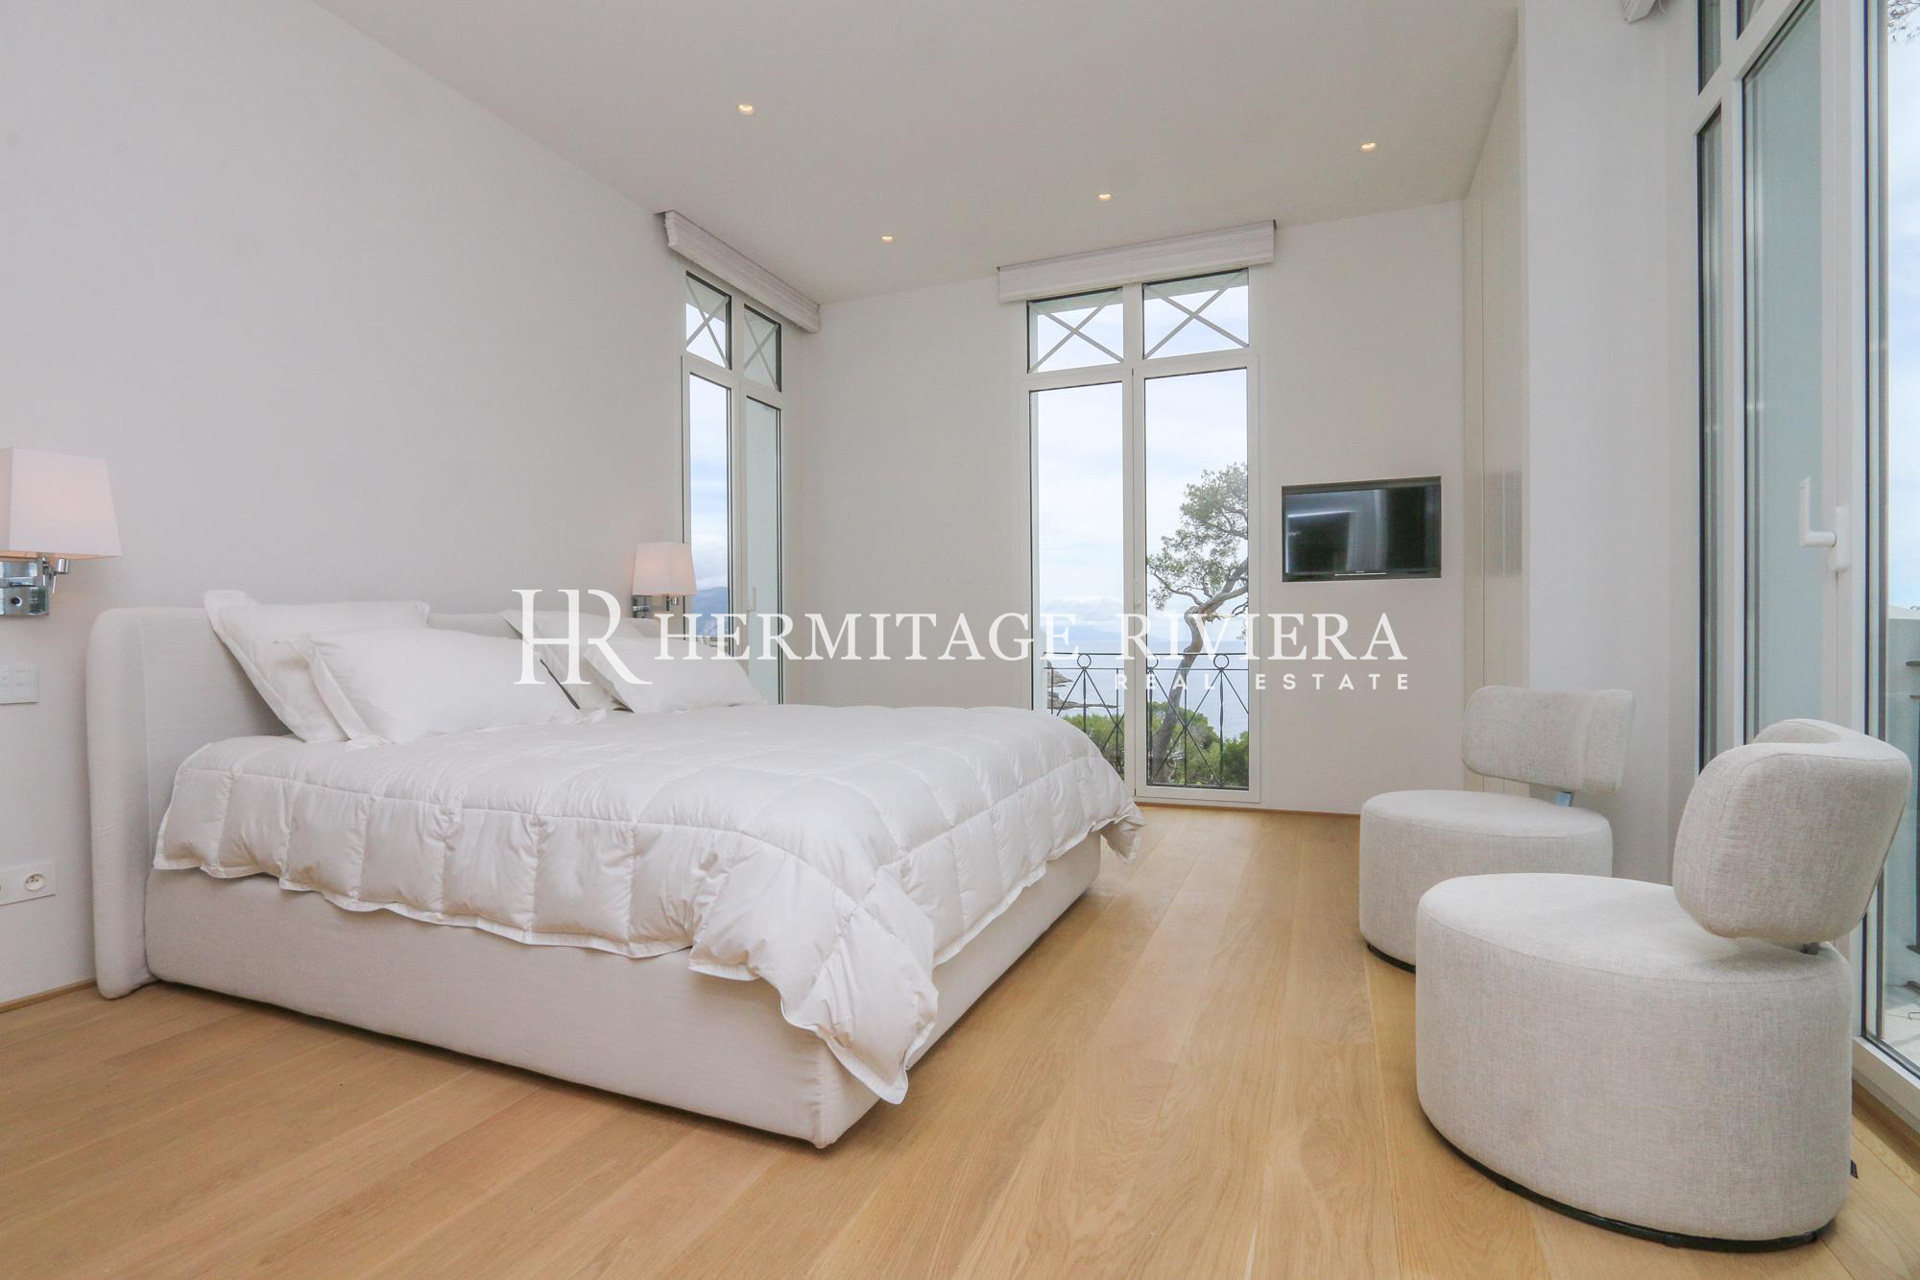 Superb property with sea view (image 17)